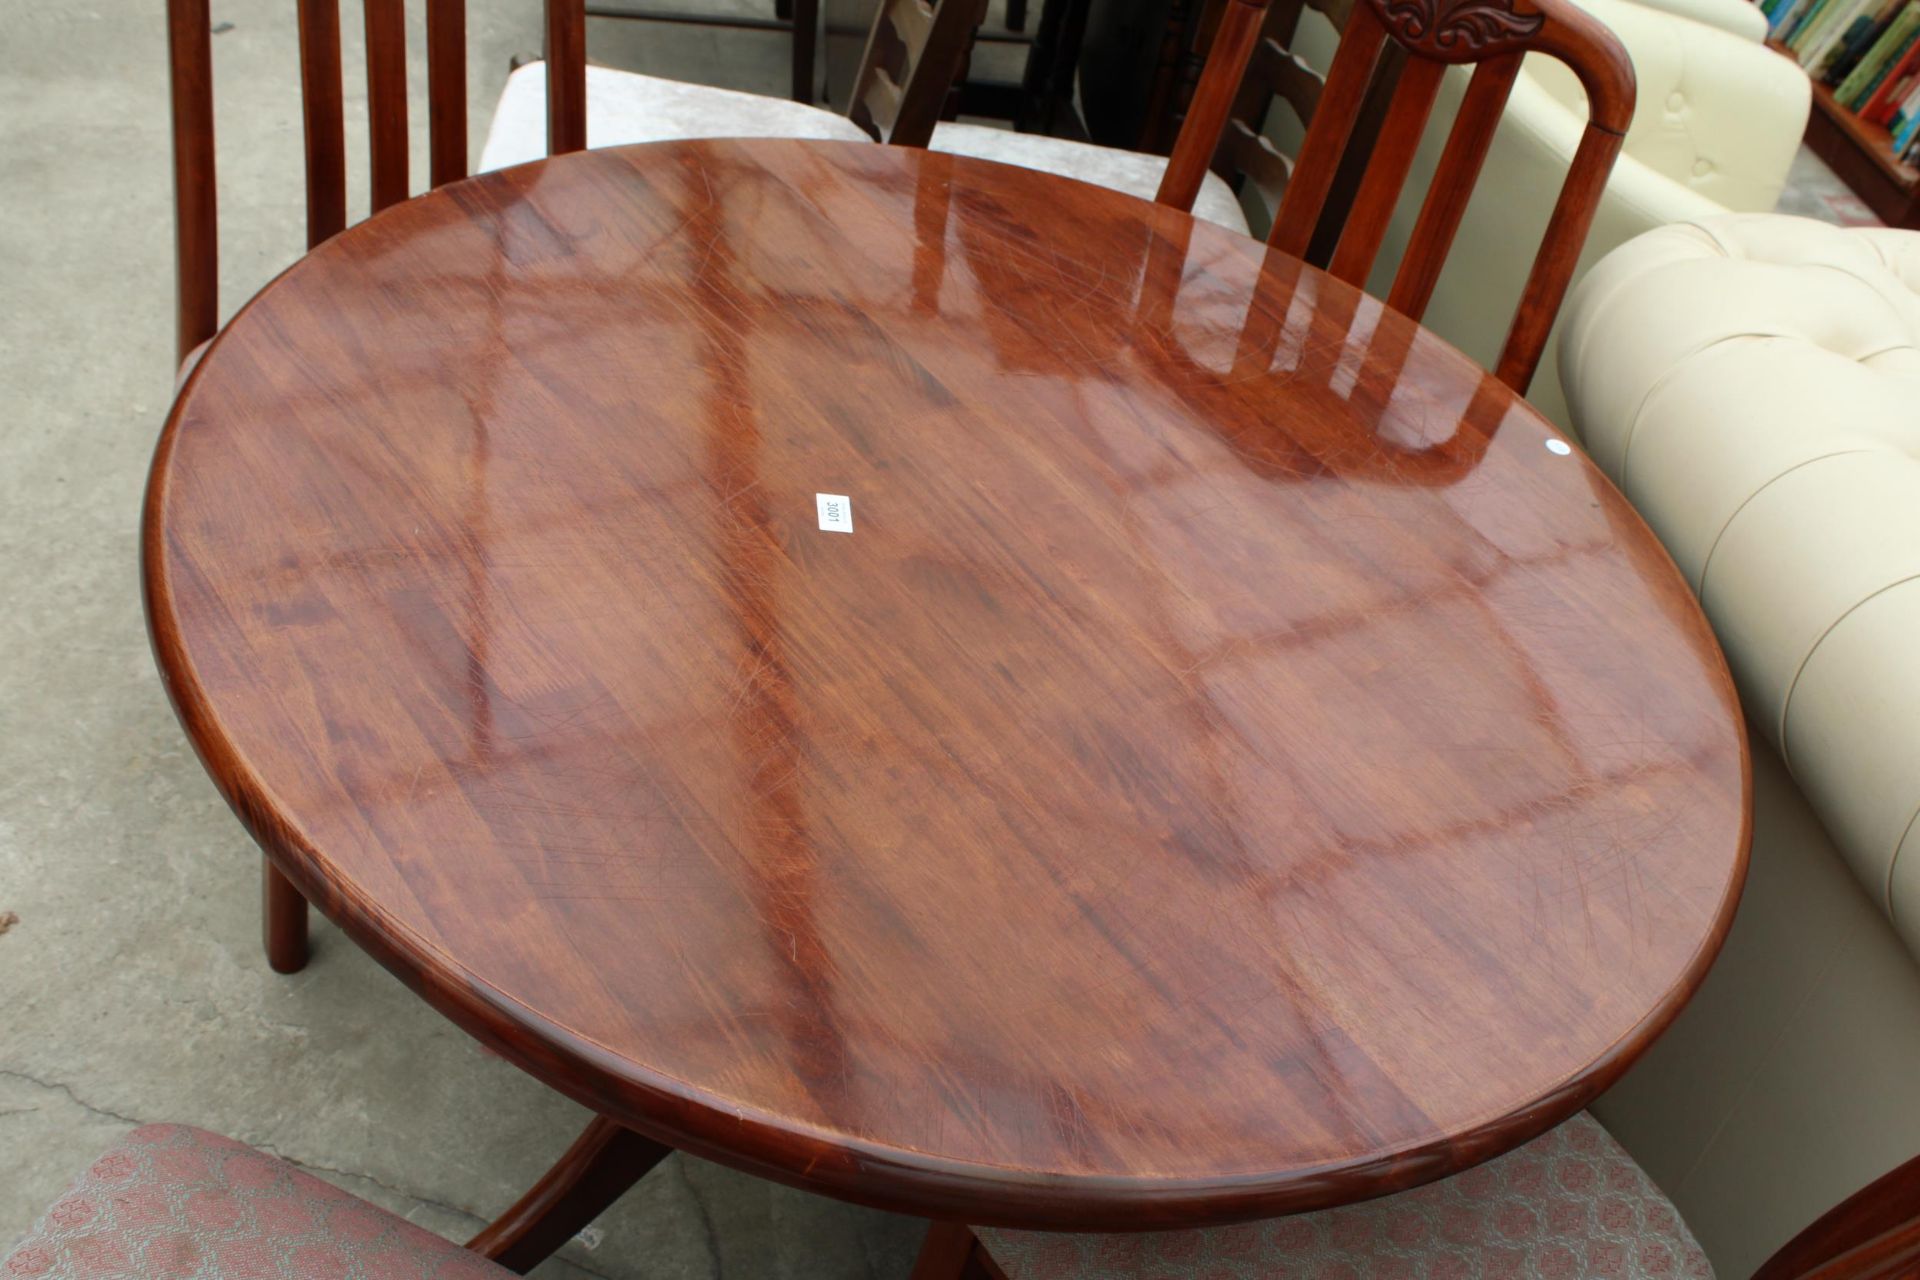 A MODERN POLISHED 42" DIAMETER DINING TABLE AND FOUR CHAIRS - Image 4 of 4